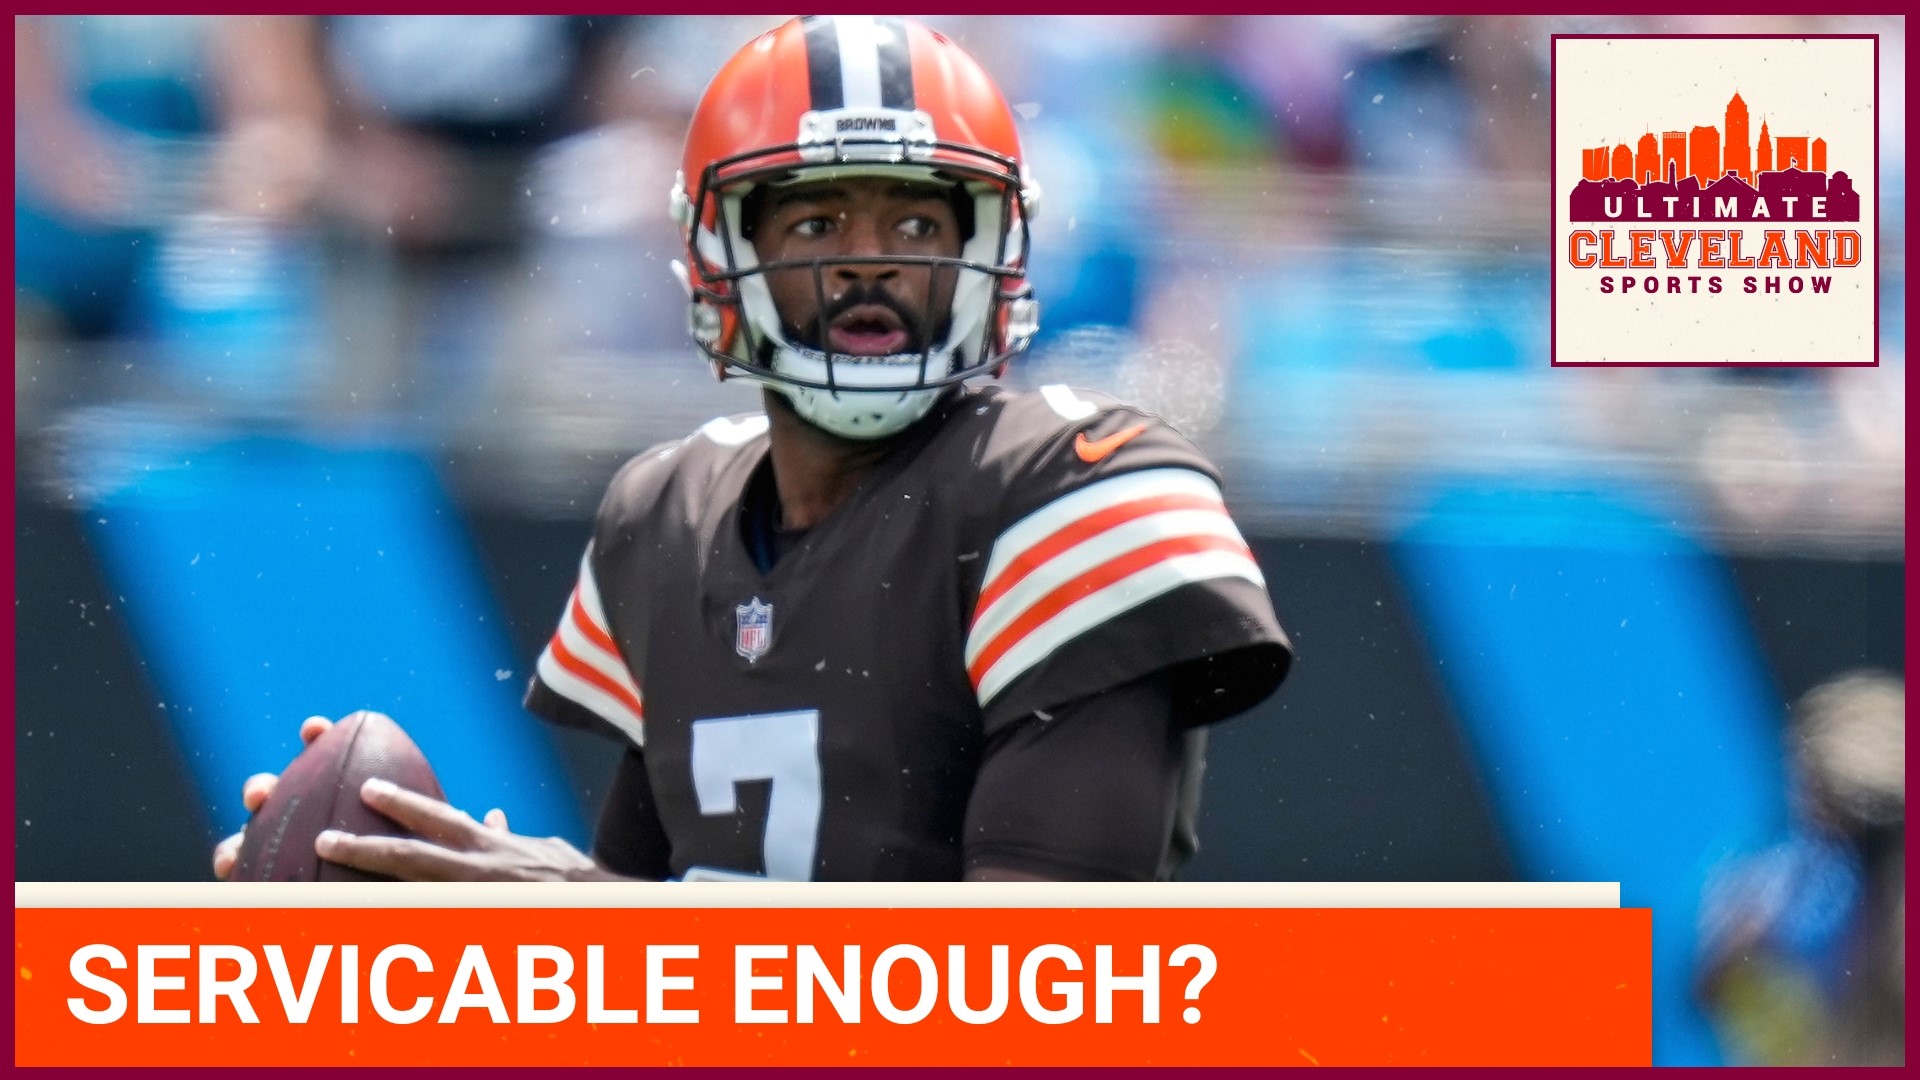 What happened in Carolina Sunday was VERY unusual for a Cleveland Browns QB. Was it enough to make you ride with 7?